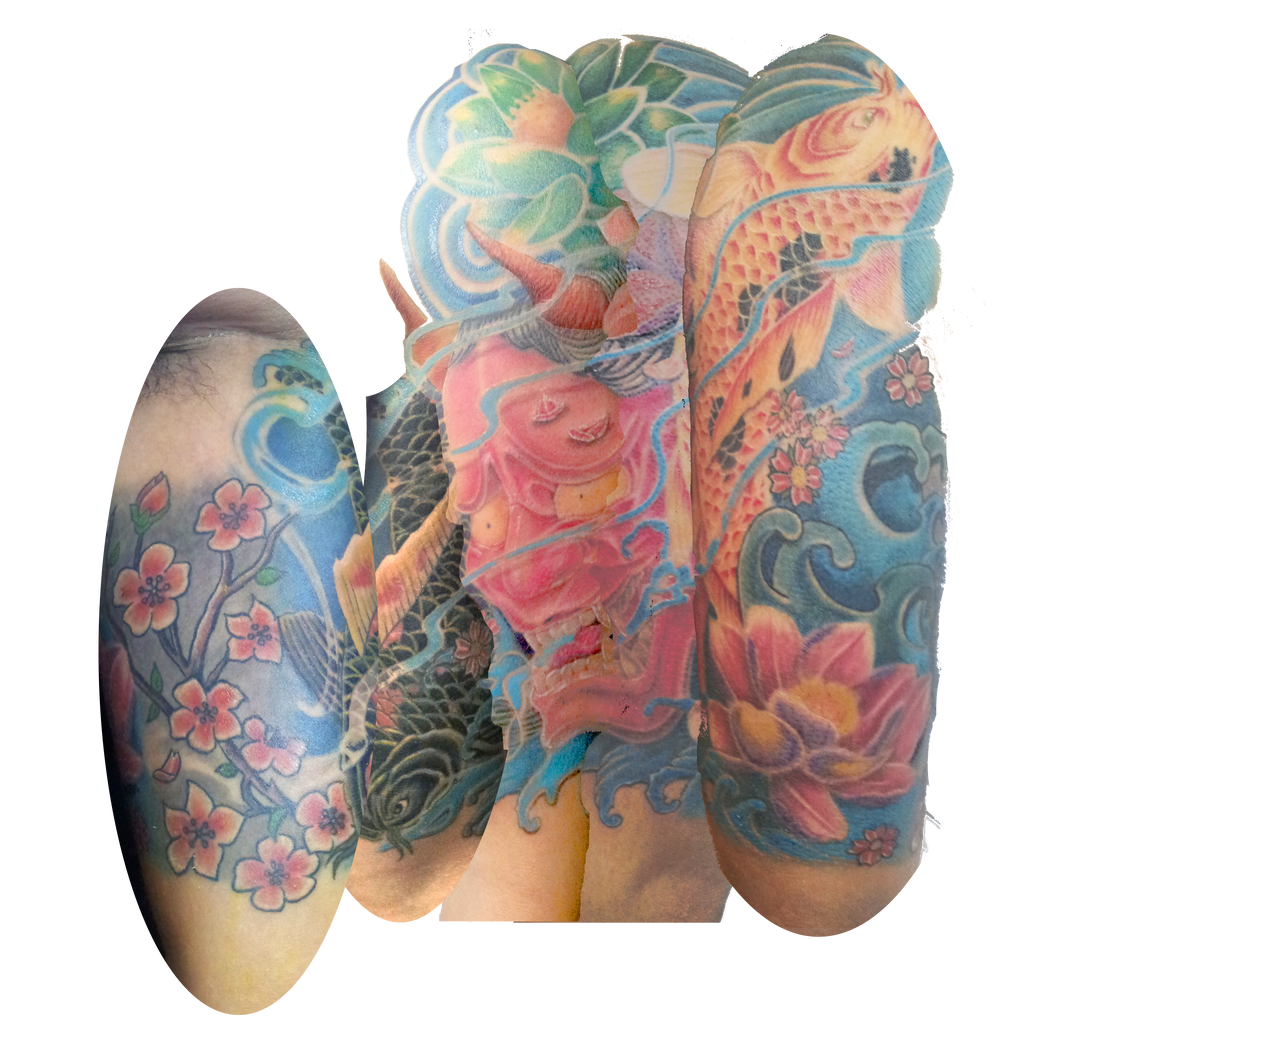 Wrap around image of my upper arm sleeve tattoo by bmtahimic on DeviantArt